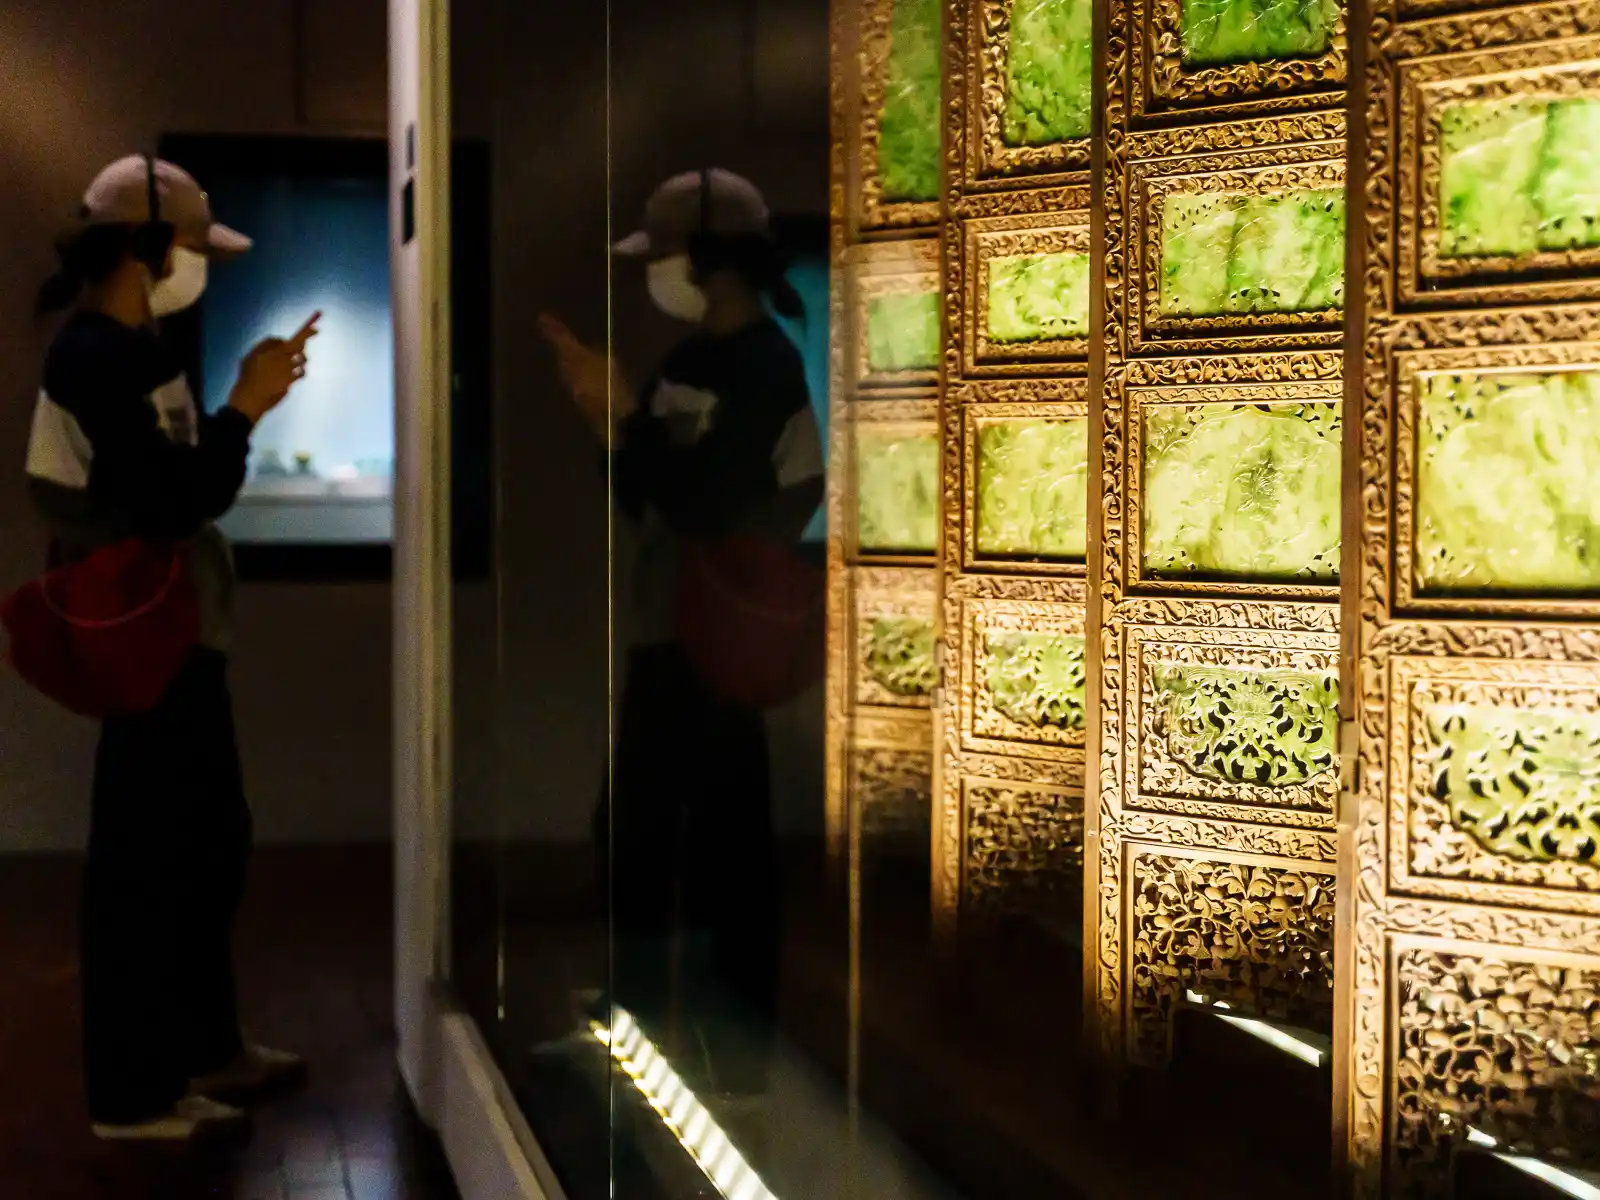 A visitor observing an exhibit of a detailed jade and gold room divider.